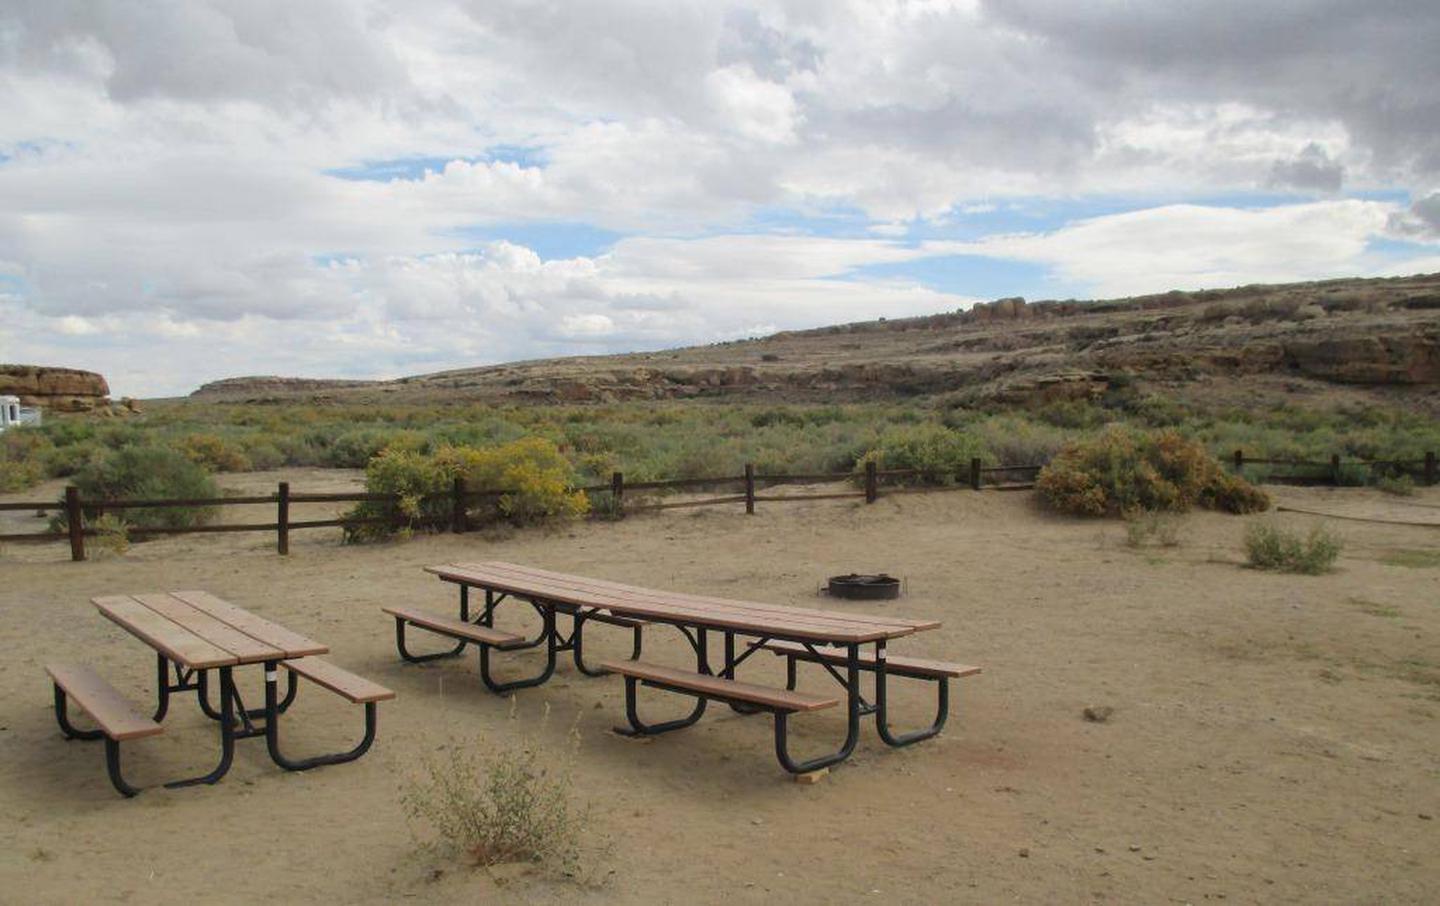 Picnic tables, fire grate and tent pads are available. Tents are only permitted in the designated tent pads.Picnic tables, fire grate and tent pads are available. Tents are only permitted in the designated tent pads. Group leader must check at the Visitor Center upon arrival. 